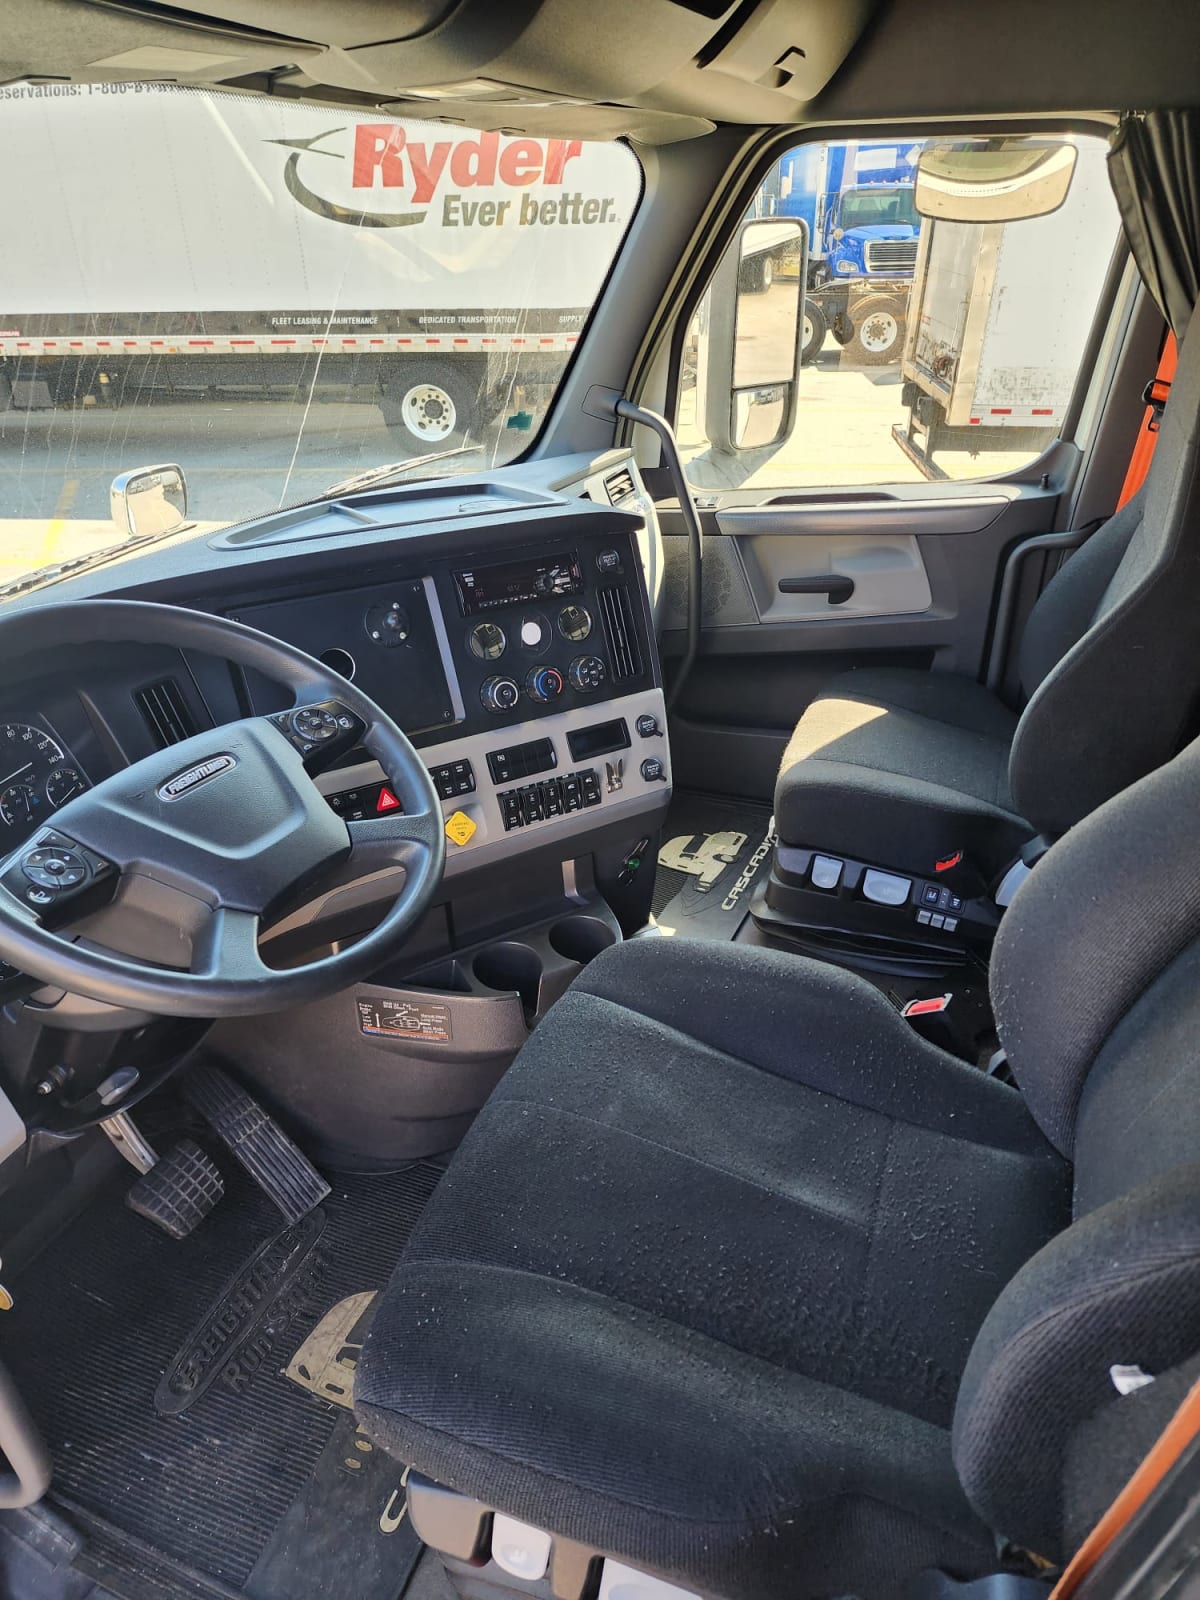 2019 Freightliner/Mercedes NEW CASCADIA PX12664 835547